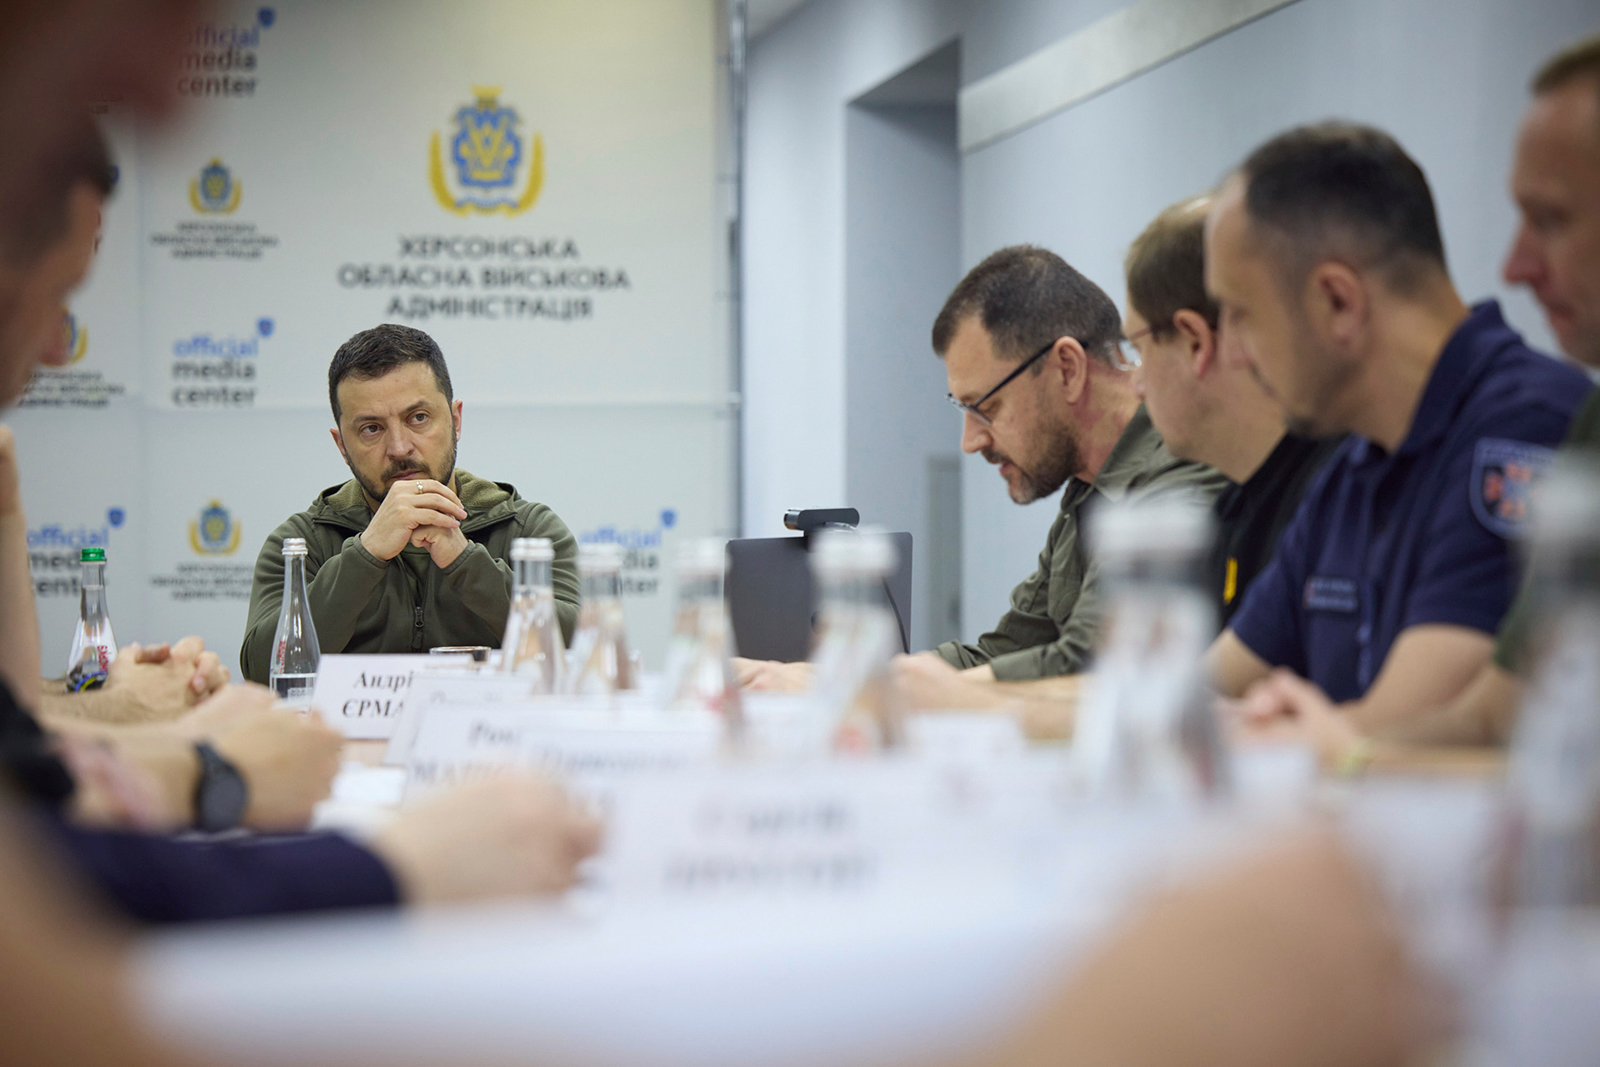 Volodymyr Zelensky chairs a regional administration session in Kherson, Ukraine, on June 8.